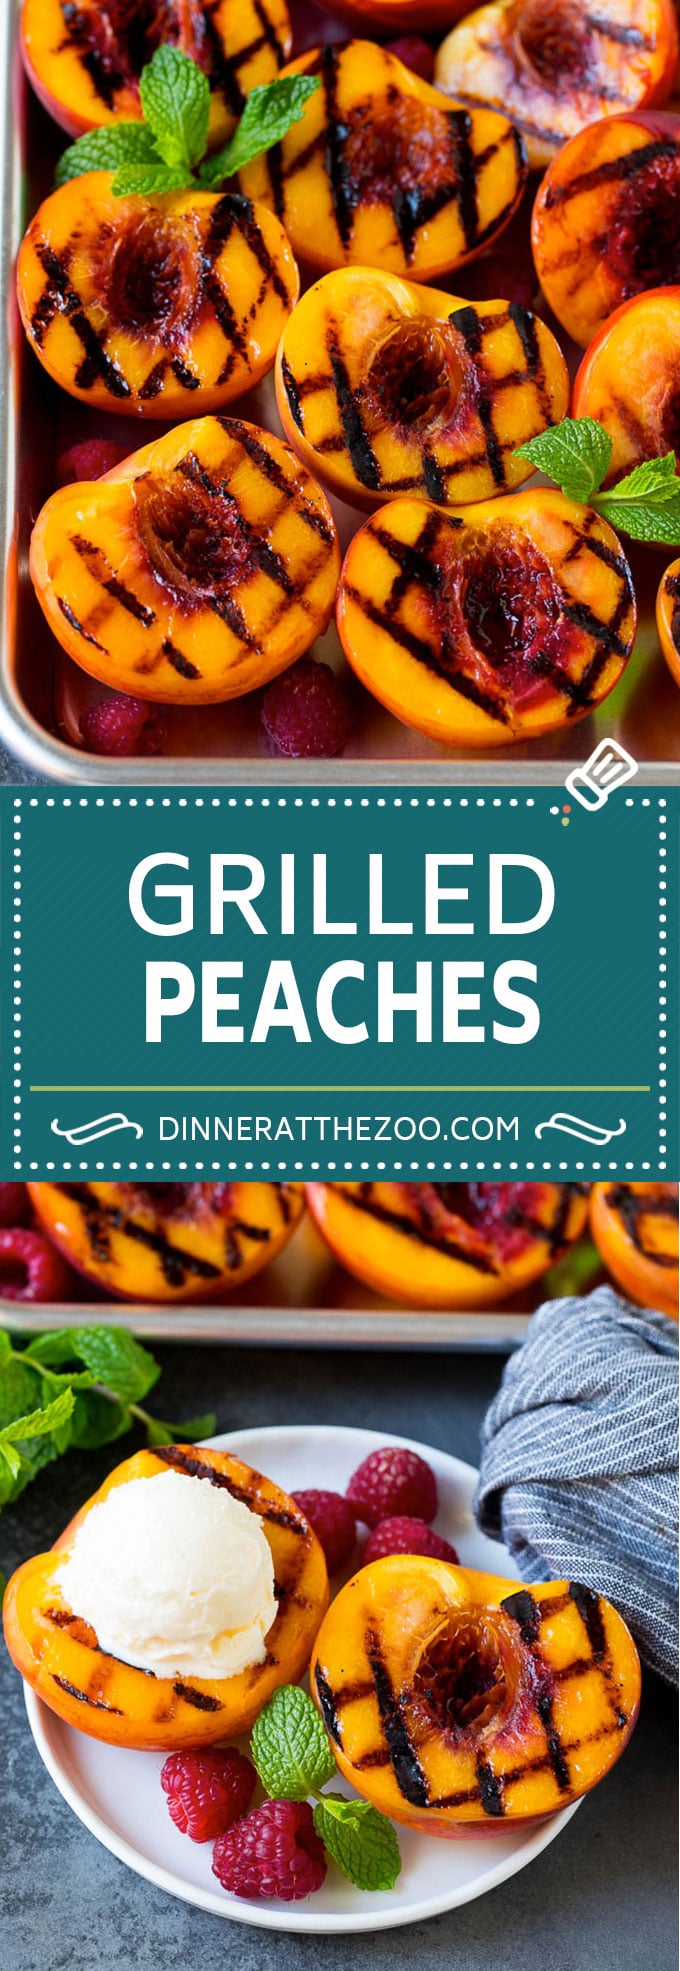 These grilled peaches are seared on the grill until tender and caramelized, then brushed with cinnamon honey for a sweet finish.